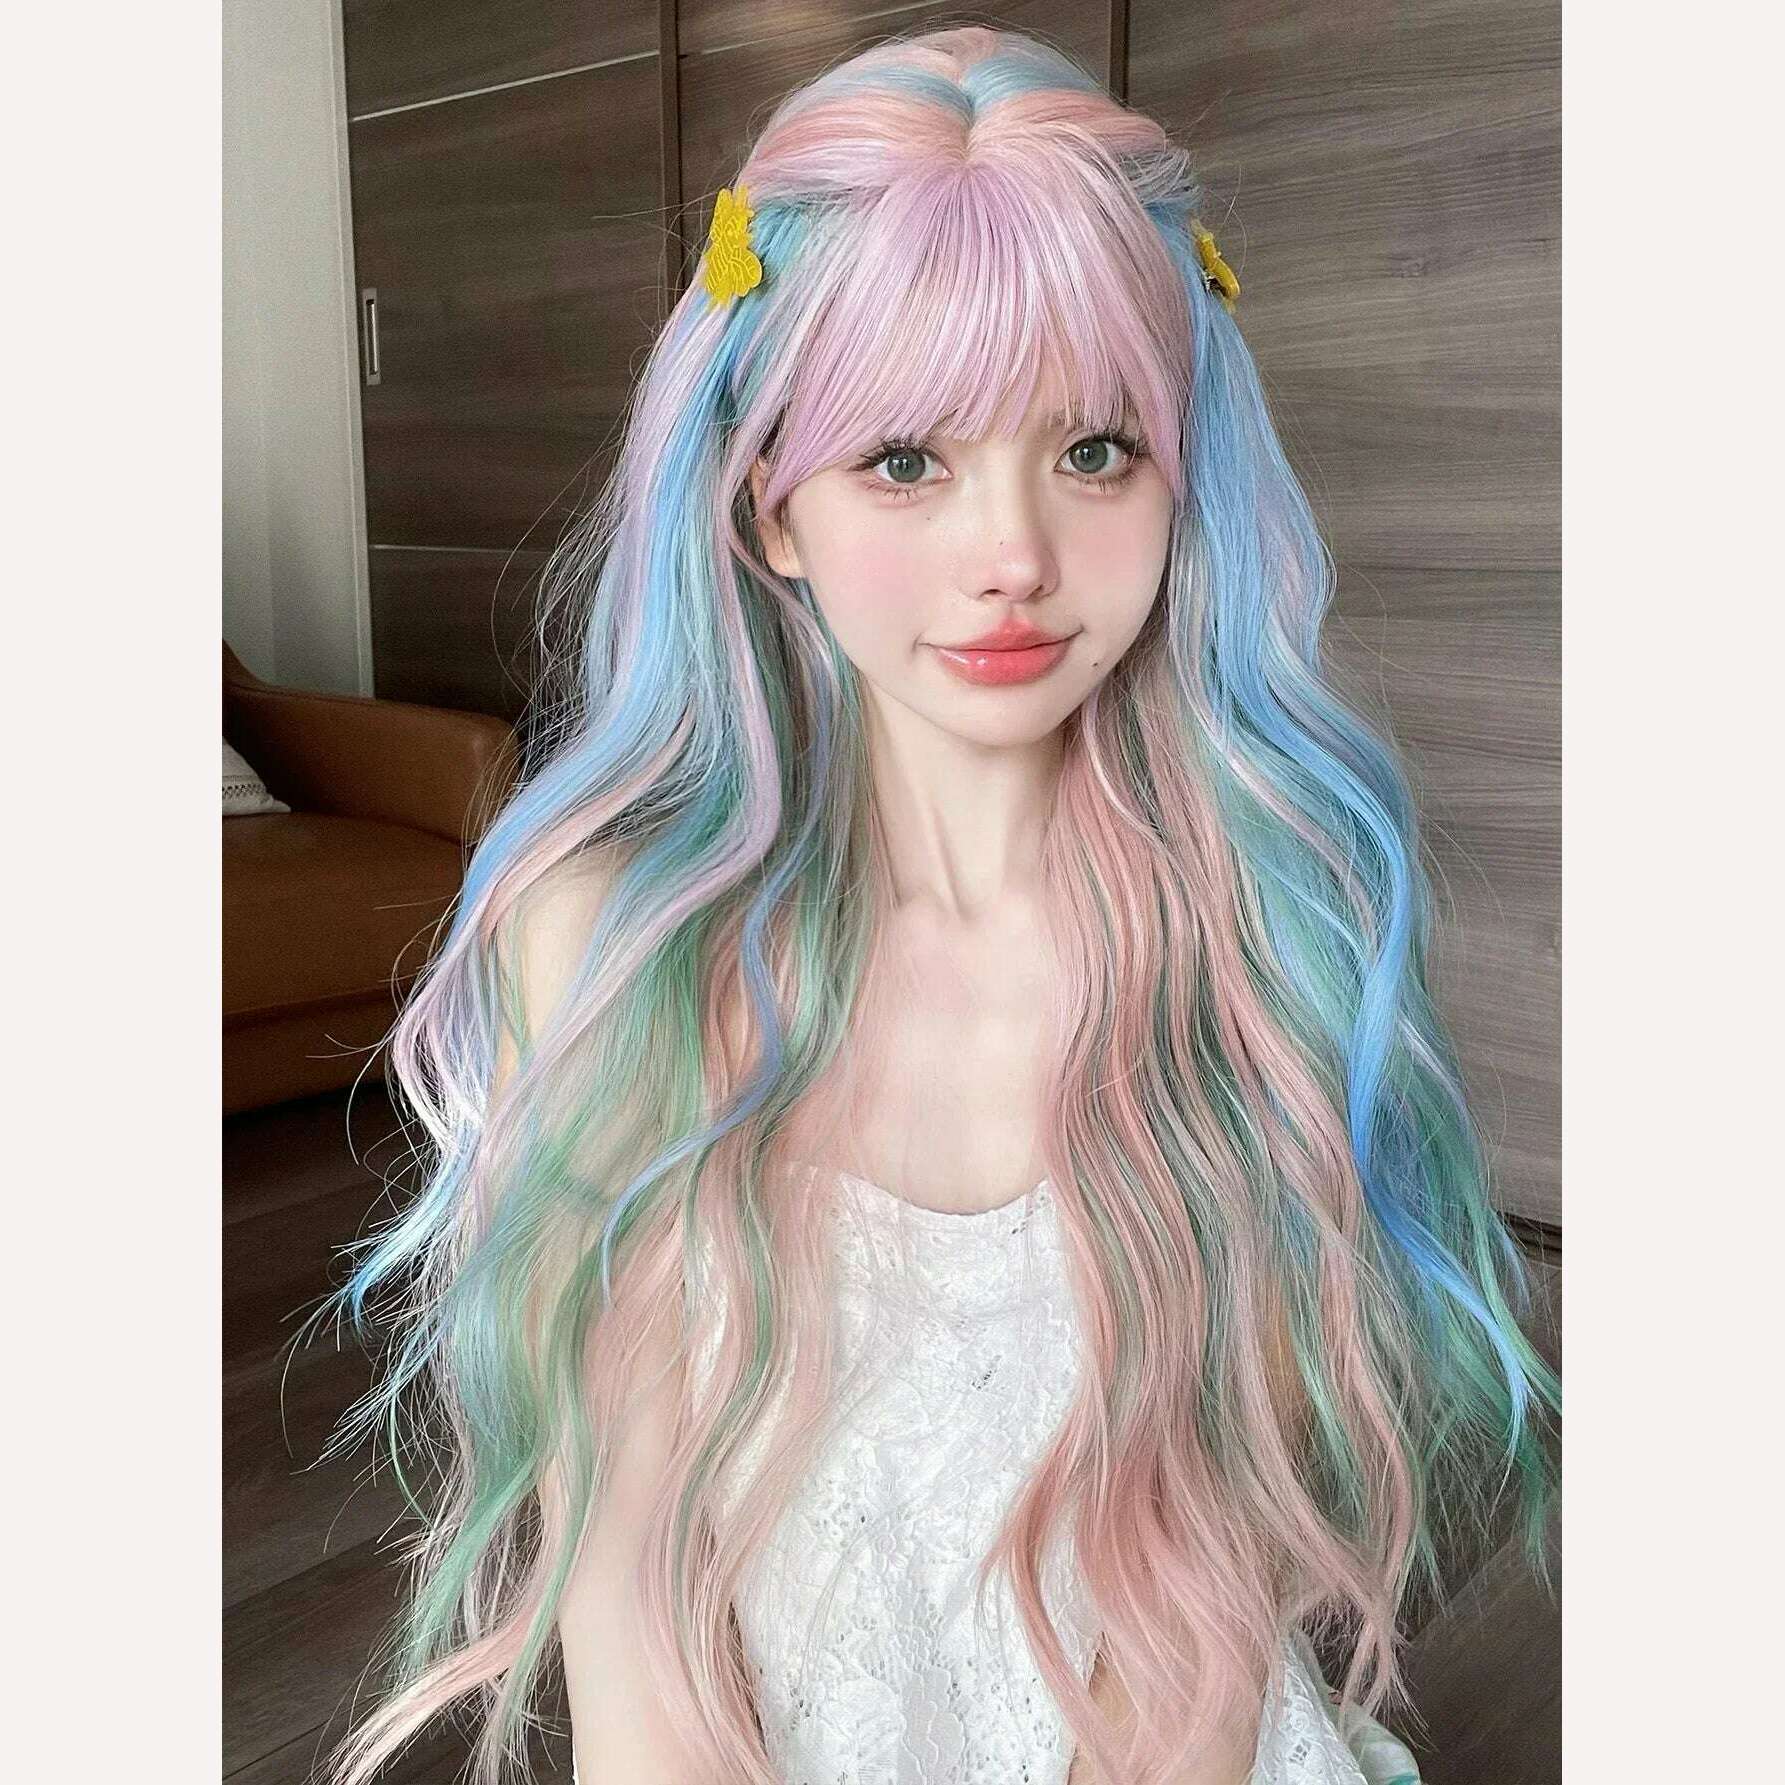 KIMLUD, 28Inch Iridescent Rainbow Color Multicolour Synthetic Wigs with Bang Long Natural Wavy Hair Wig for Women Cosplay Heat Resistant, KIMLUD Womens Clothes